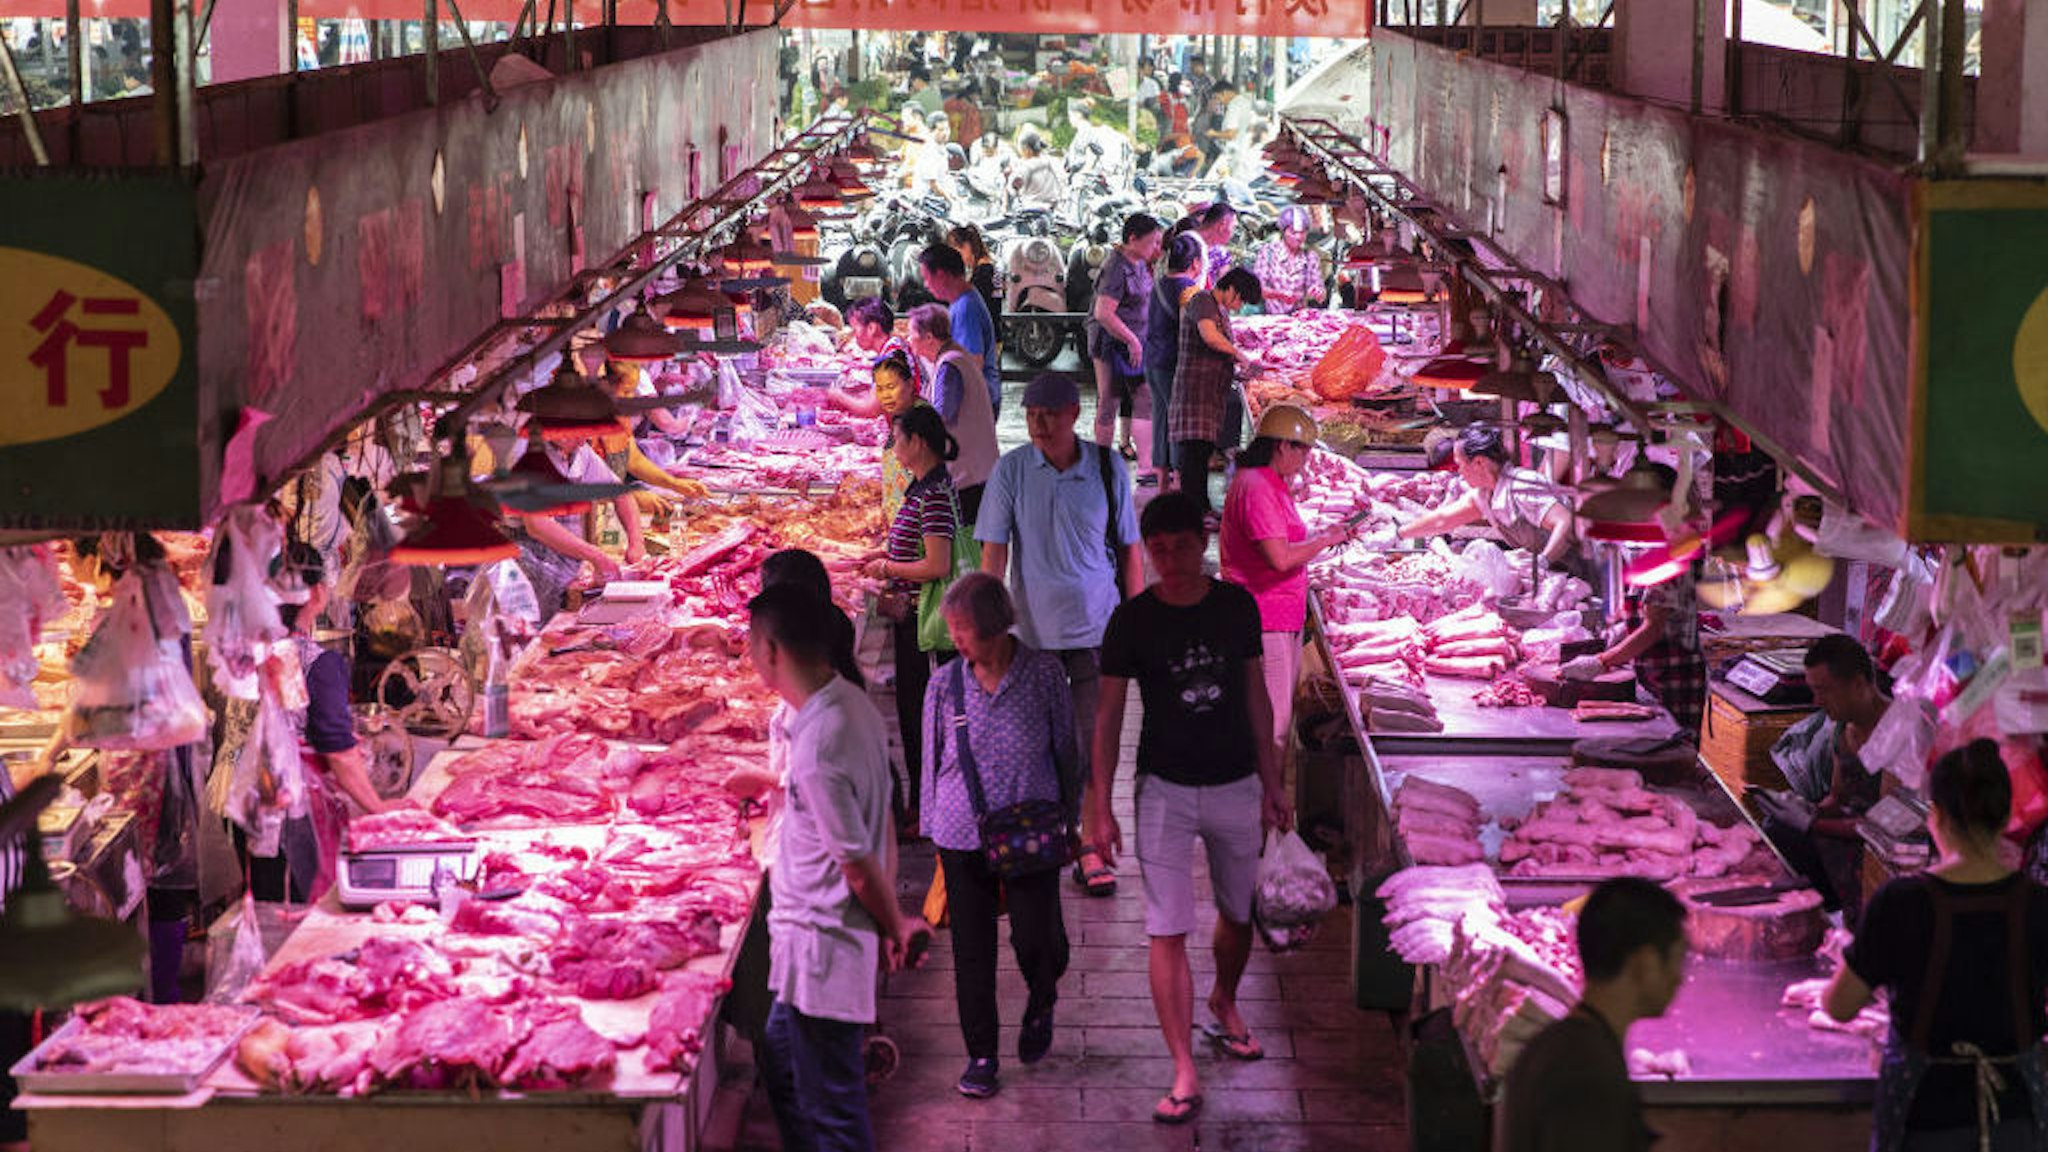 Customers walk past pork stalls at the Dancun Market in Nanning, Guangxi province, China, on Tuesday, Sept. 17, 2019. A protracted U.S. trade war, protests in Hong Kong, soaring food prices and the slowest economic growth in decades are among the many problems facing Chinese President Xi Jinping as he prepares to celebrate 70 years of Communist Party rule. Photographer: Qilai Shen/Bloomberg